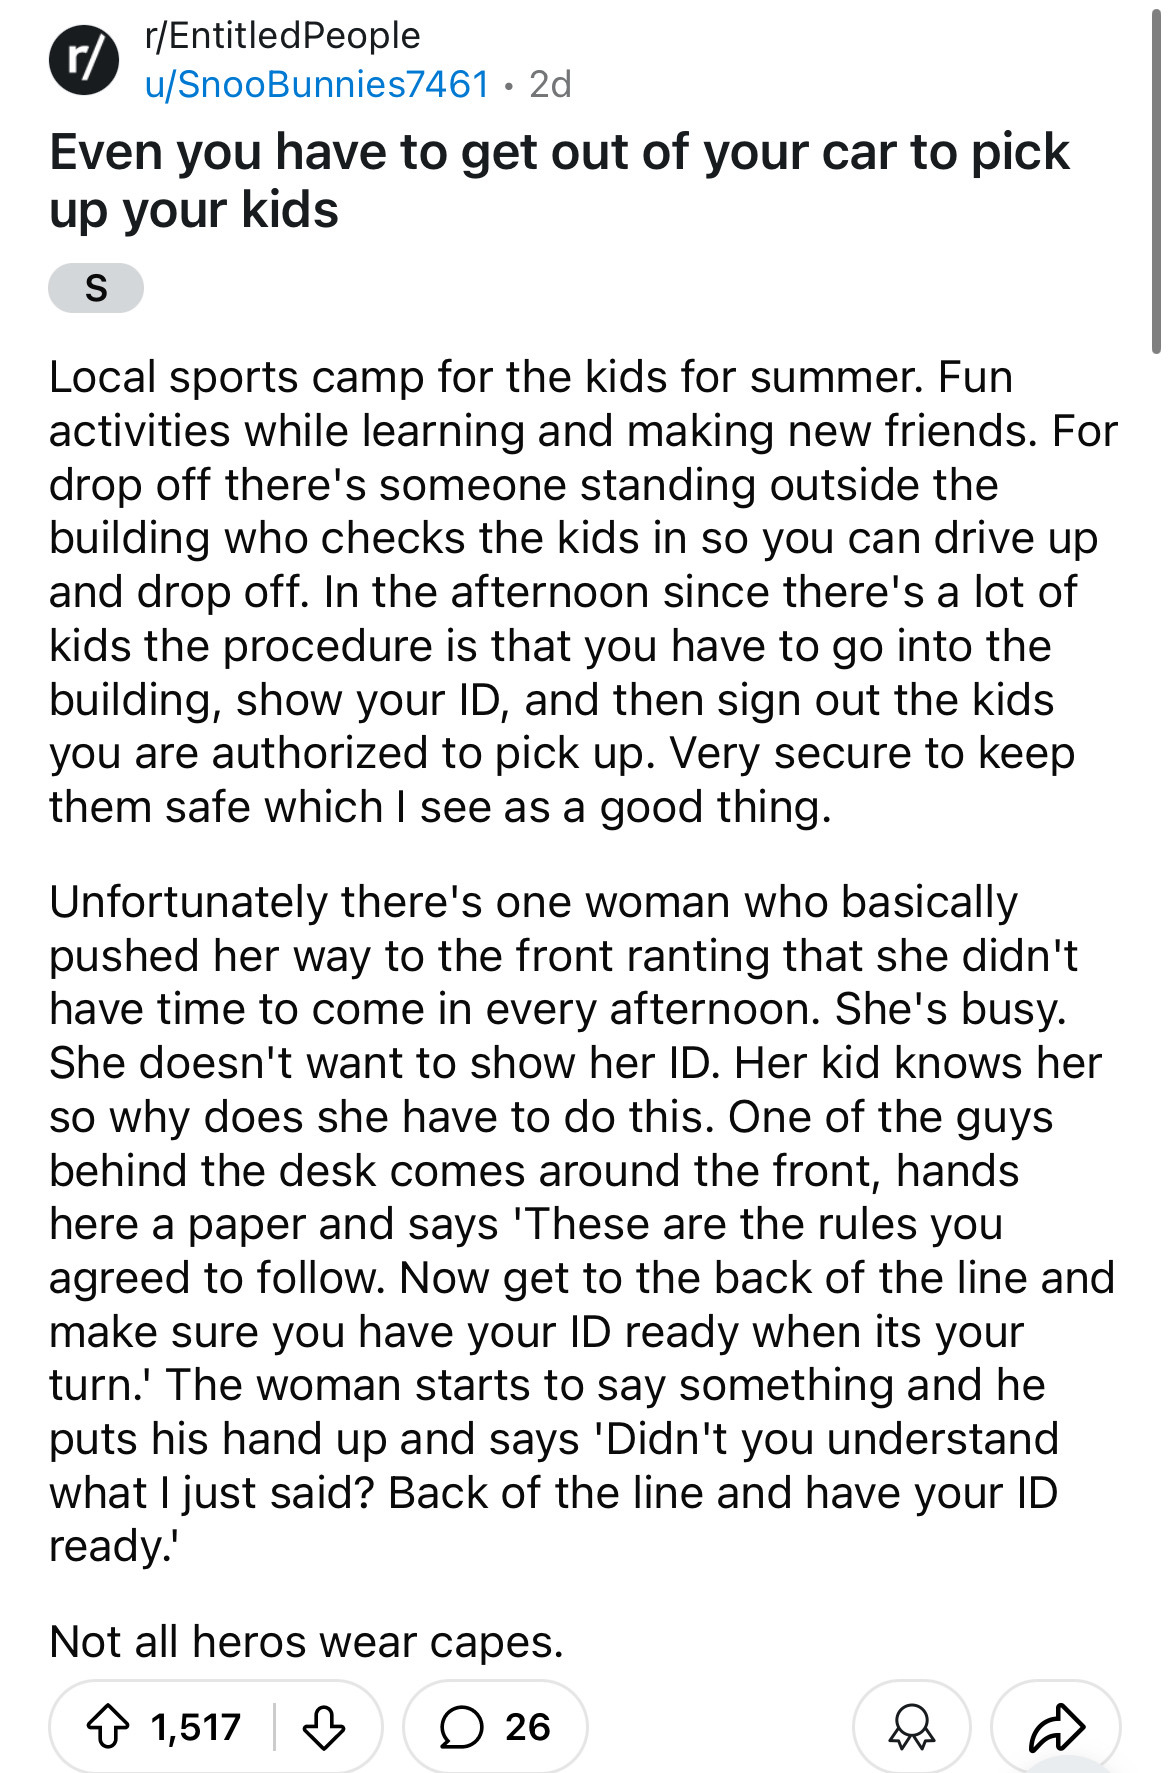 document - rEntitled People uSnooBunnies7461 2d Even you have to get out of your car to pick up your kids S Local sports camp for the kids for summer. Fun activities while learning and making new friends. For drop off there's someone standing outside the 